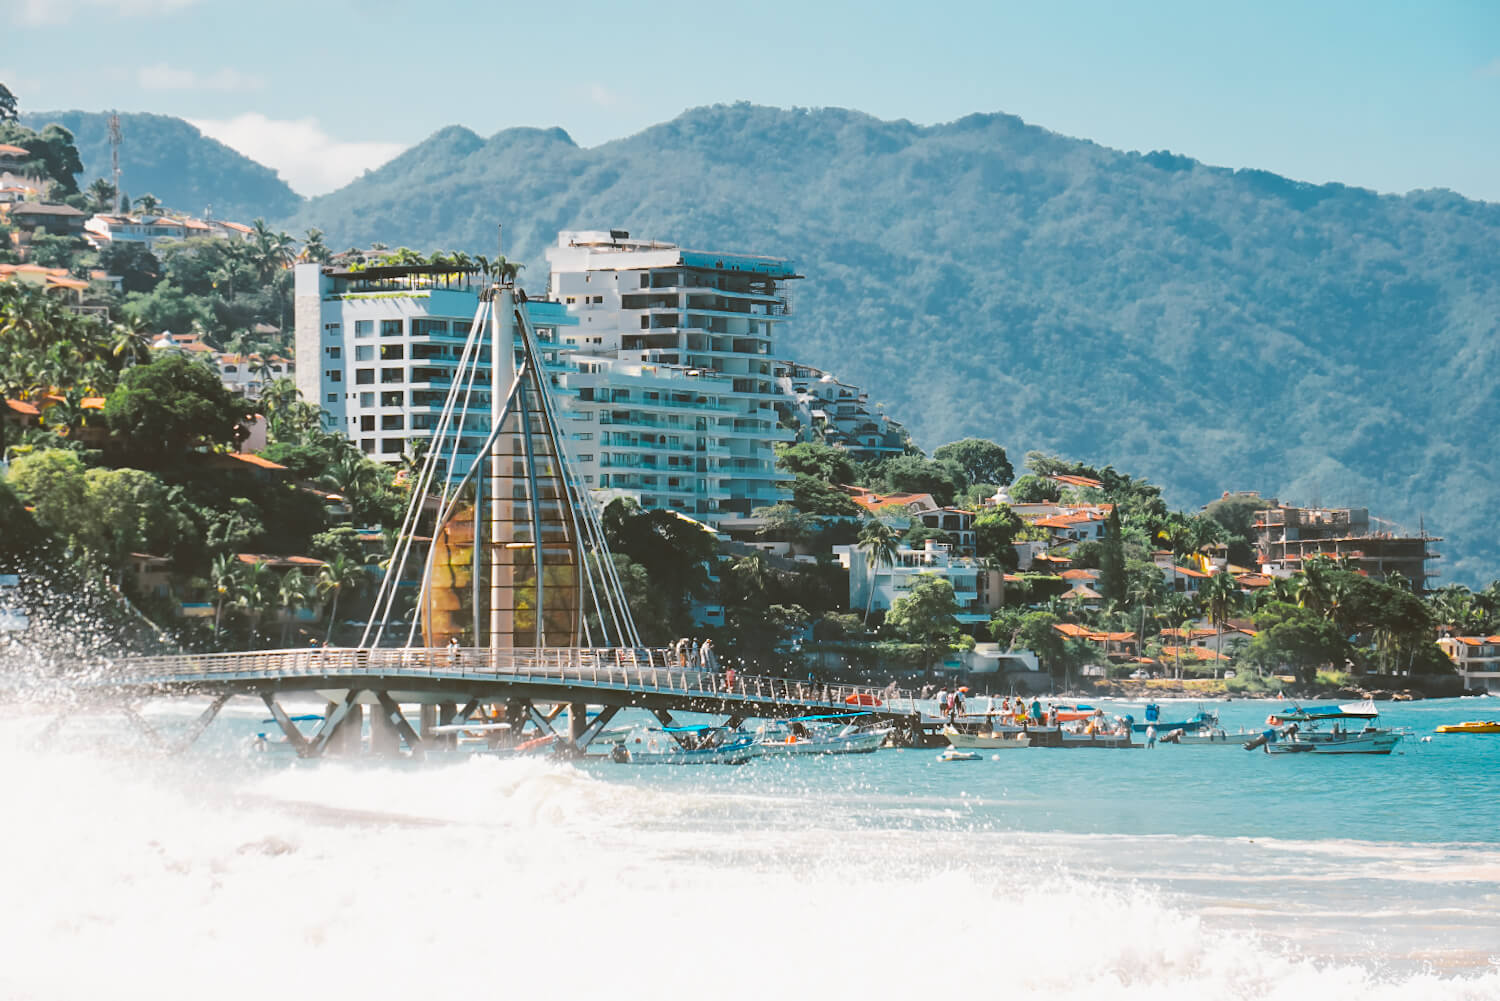 22 Awesome Things to Do in Puerto Vallarta, Mexico